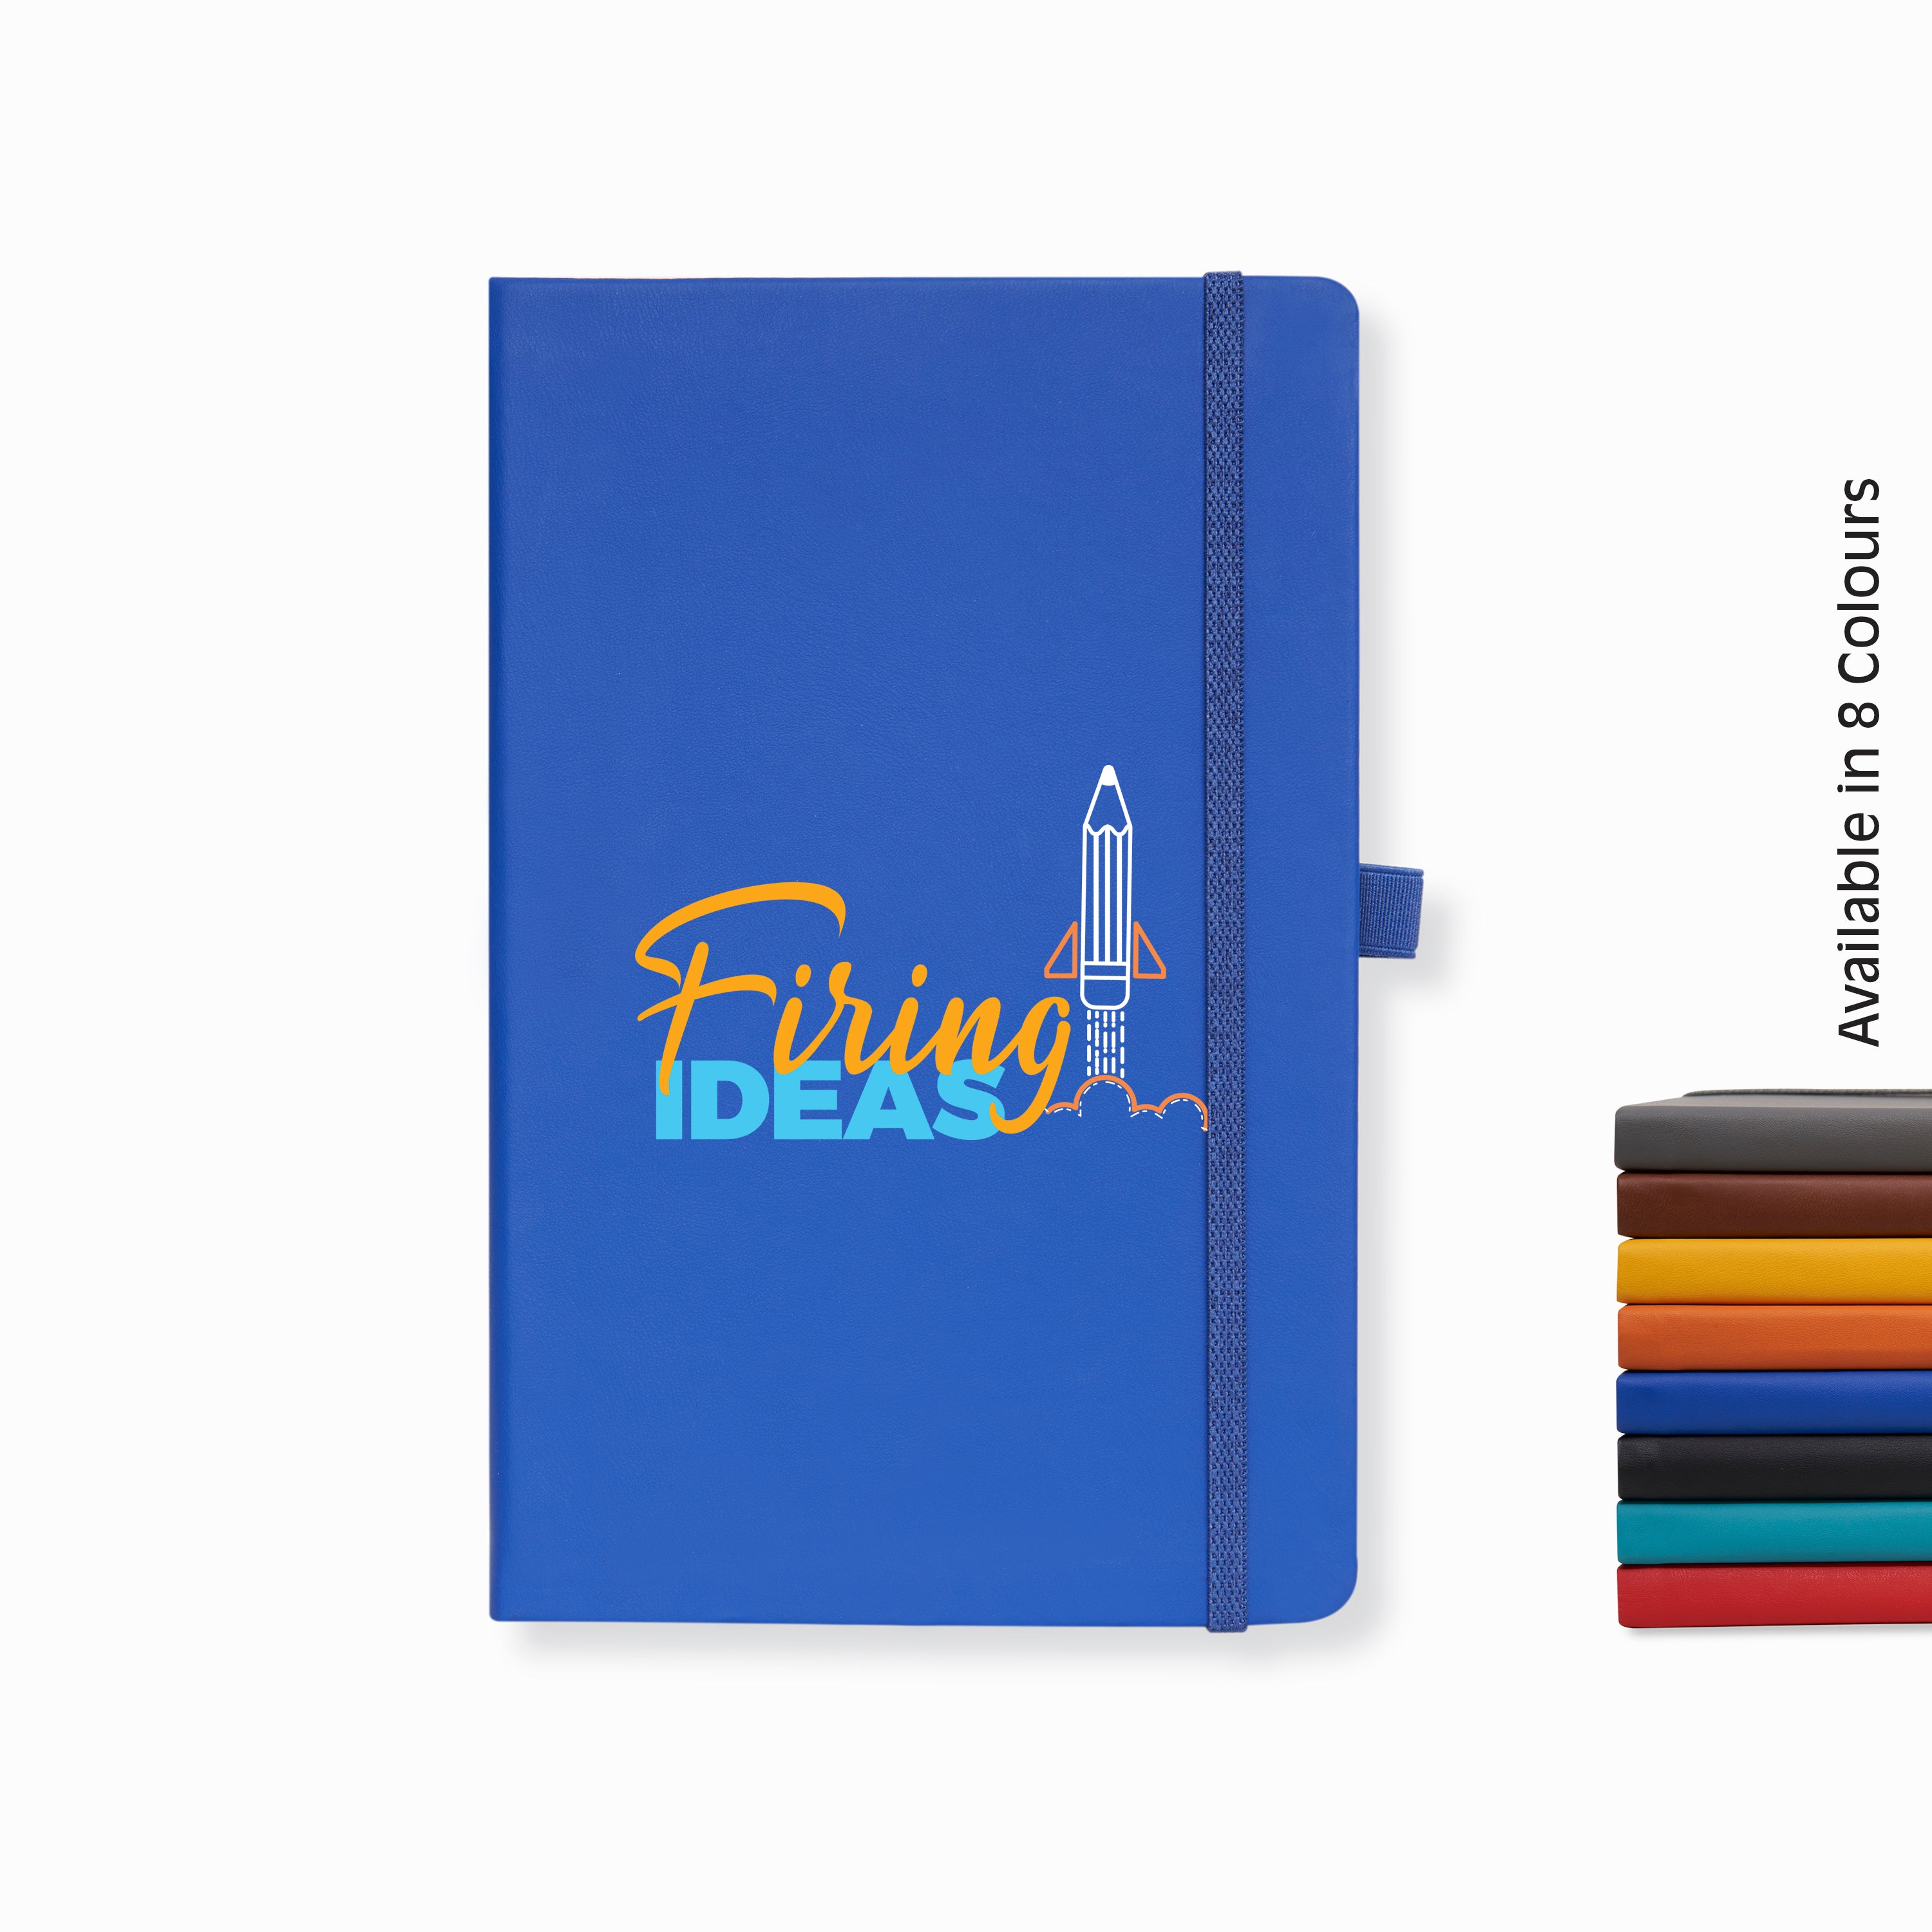 Doodle Pro Series Executive A5 PU Leather Hardbound Ruled Bright Blue Notebook with Pen Loop [Firing Ideas]